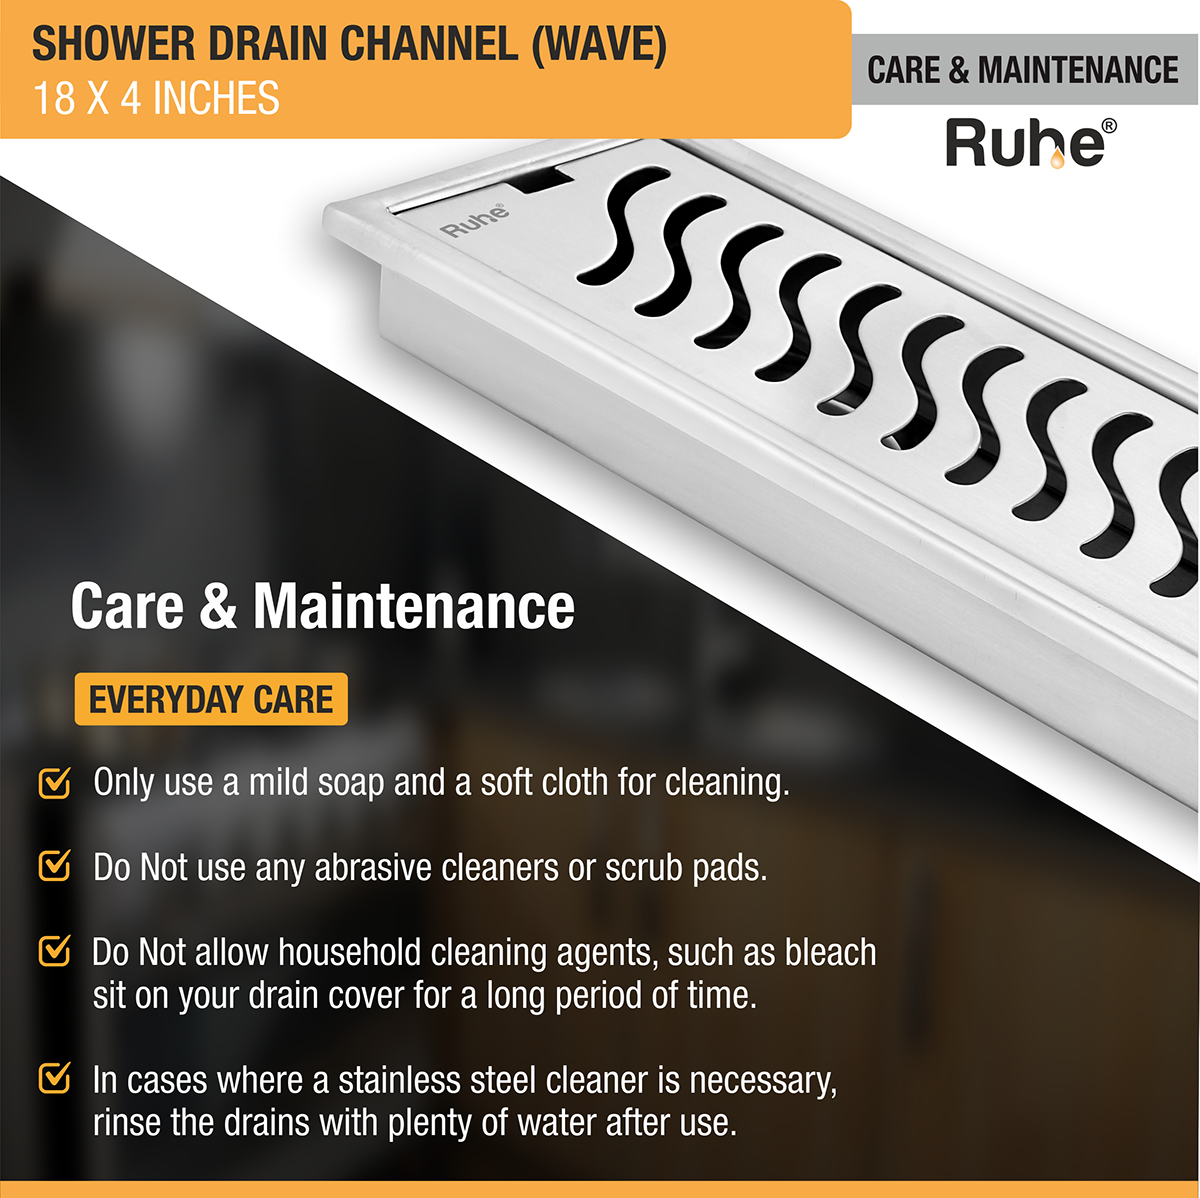 Wave Shower Drain Channel (18 X 4 Inches) with Cockroach Trap (304 Grade) care and maintenance